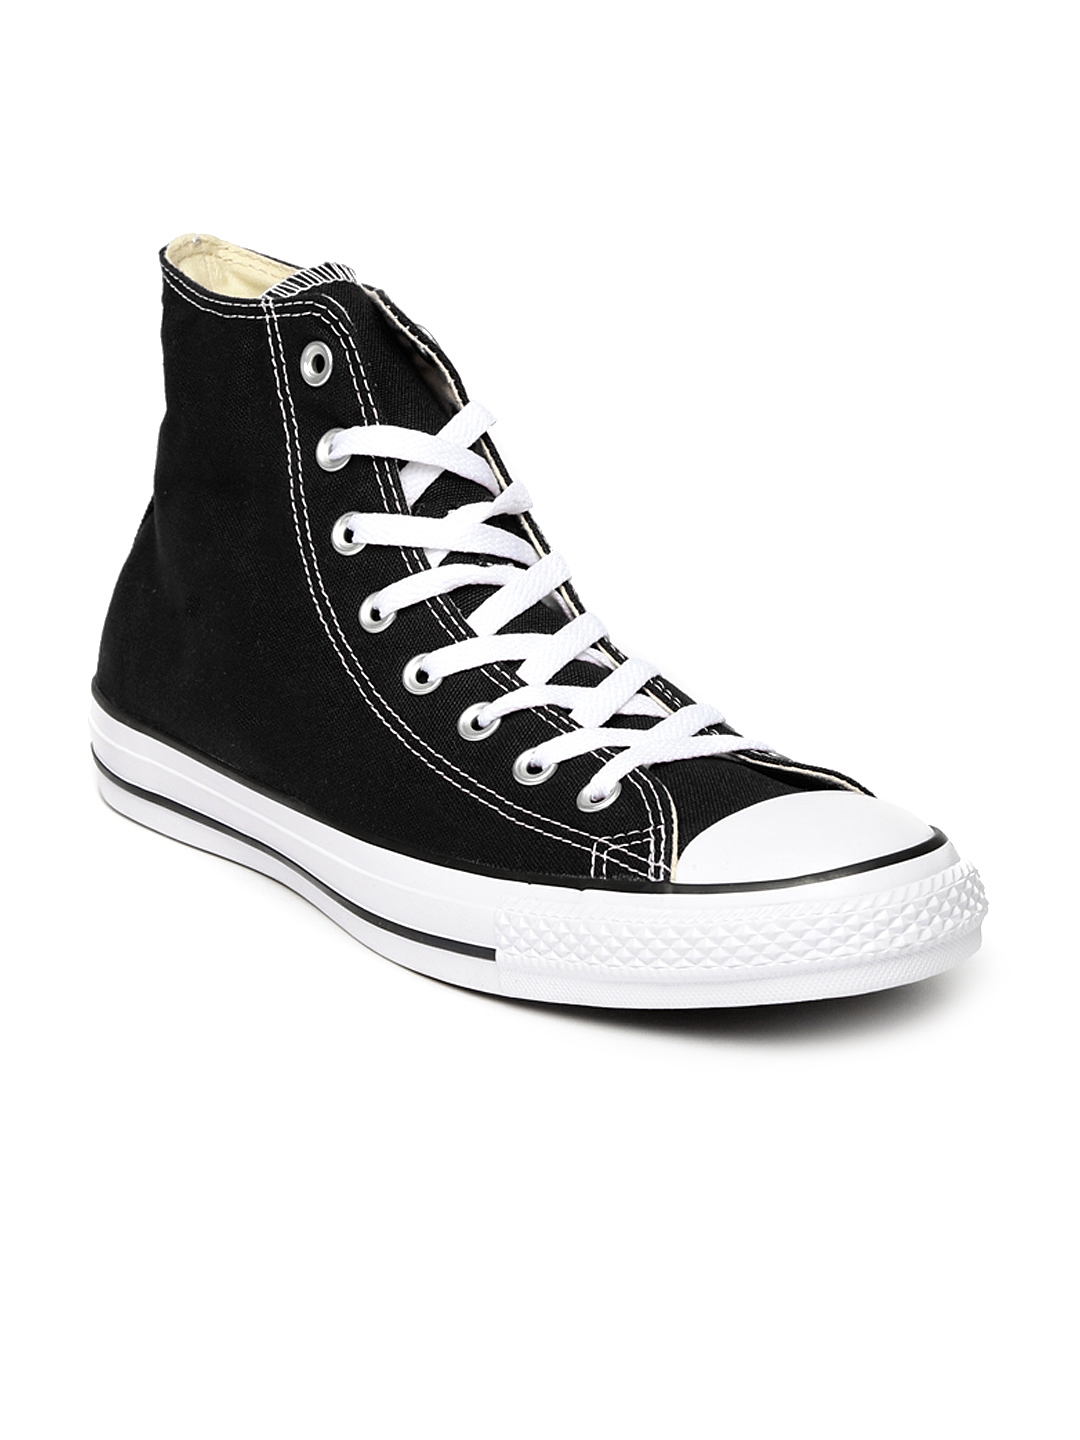 Buy Converse Unisex Black Sneakers - Casual Shoes for Unisex 1338542 ...